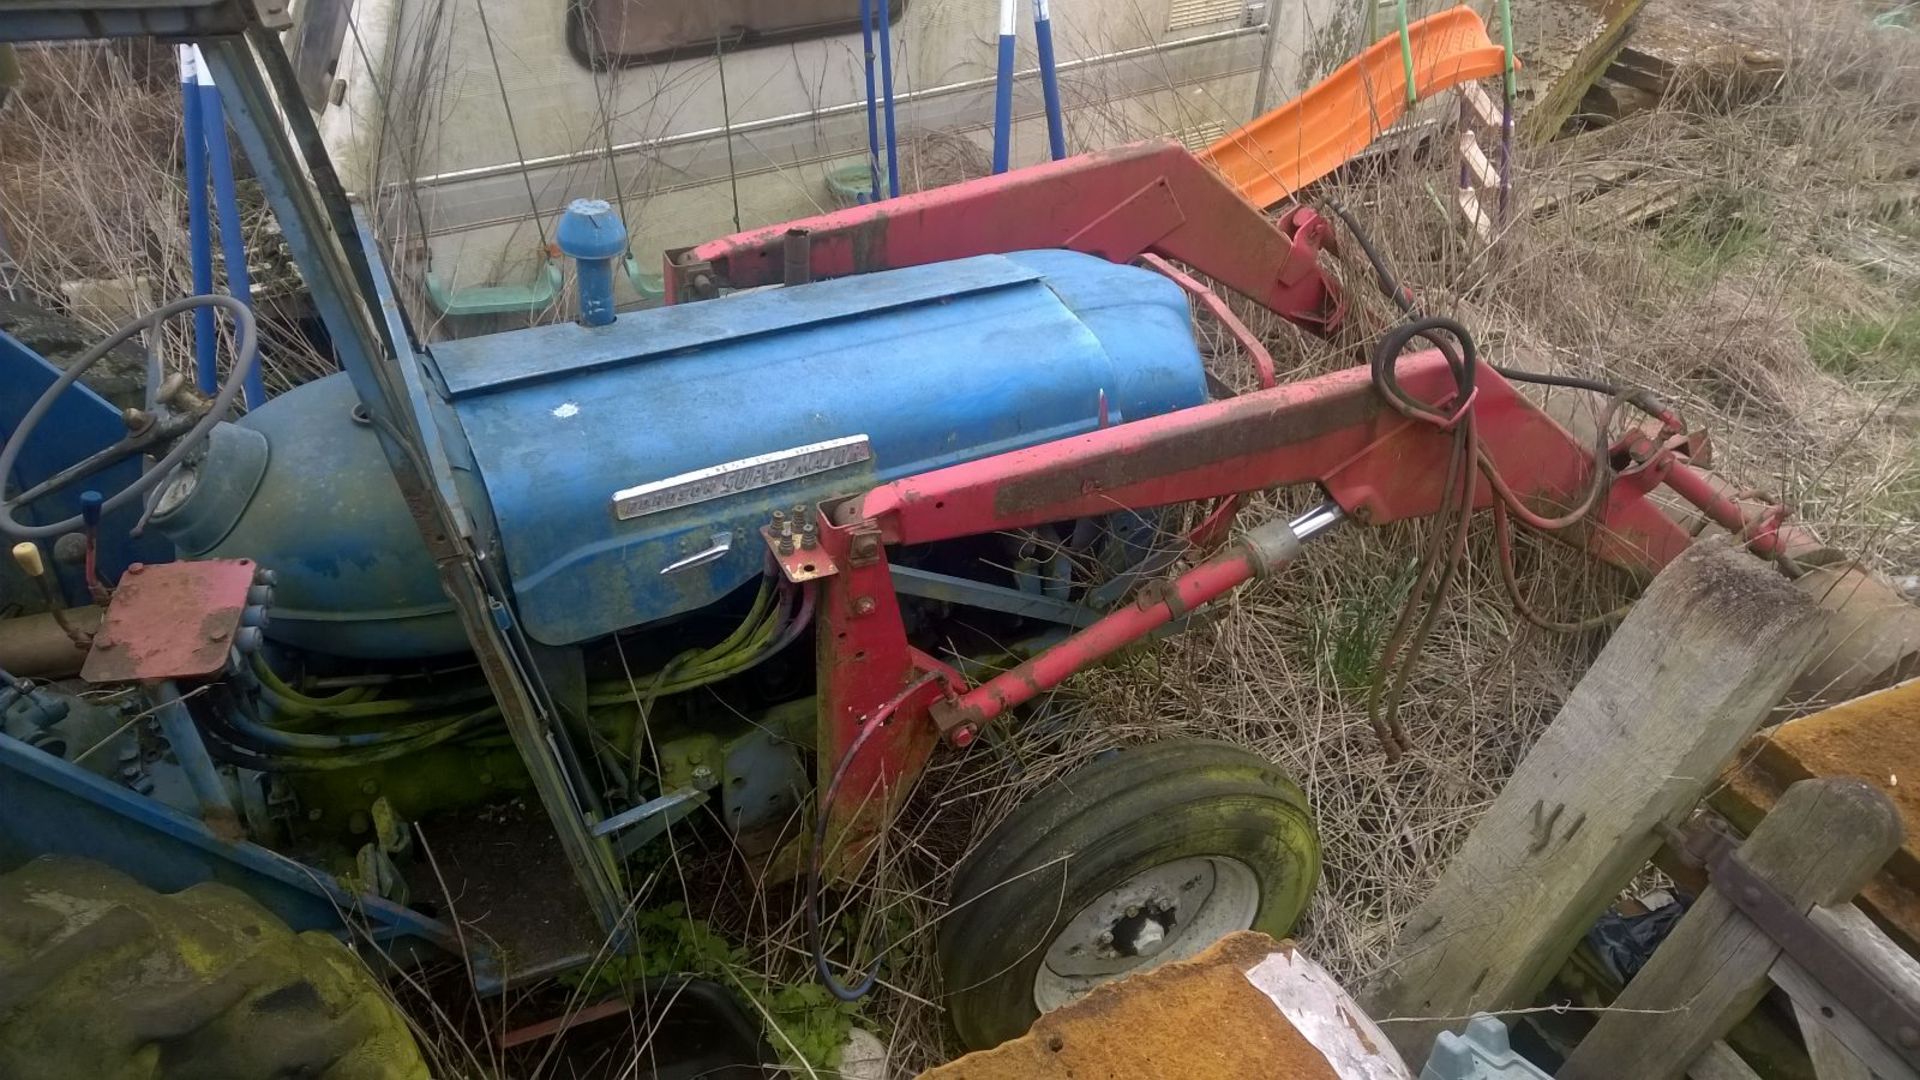 FORDSON  SUPER MAJOR c/w POWER LOADER   WE HAVENT HEARD IT RUNNING YET BUT WE ARE INTENDING TO GET - Image 4 of 20